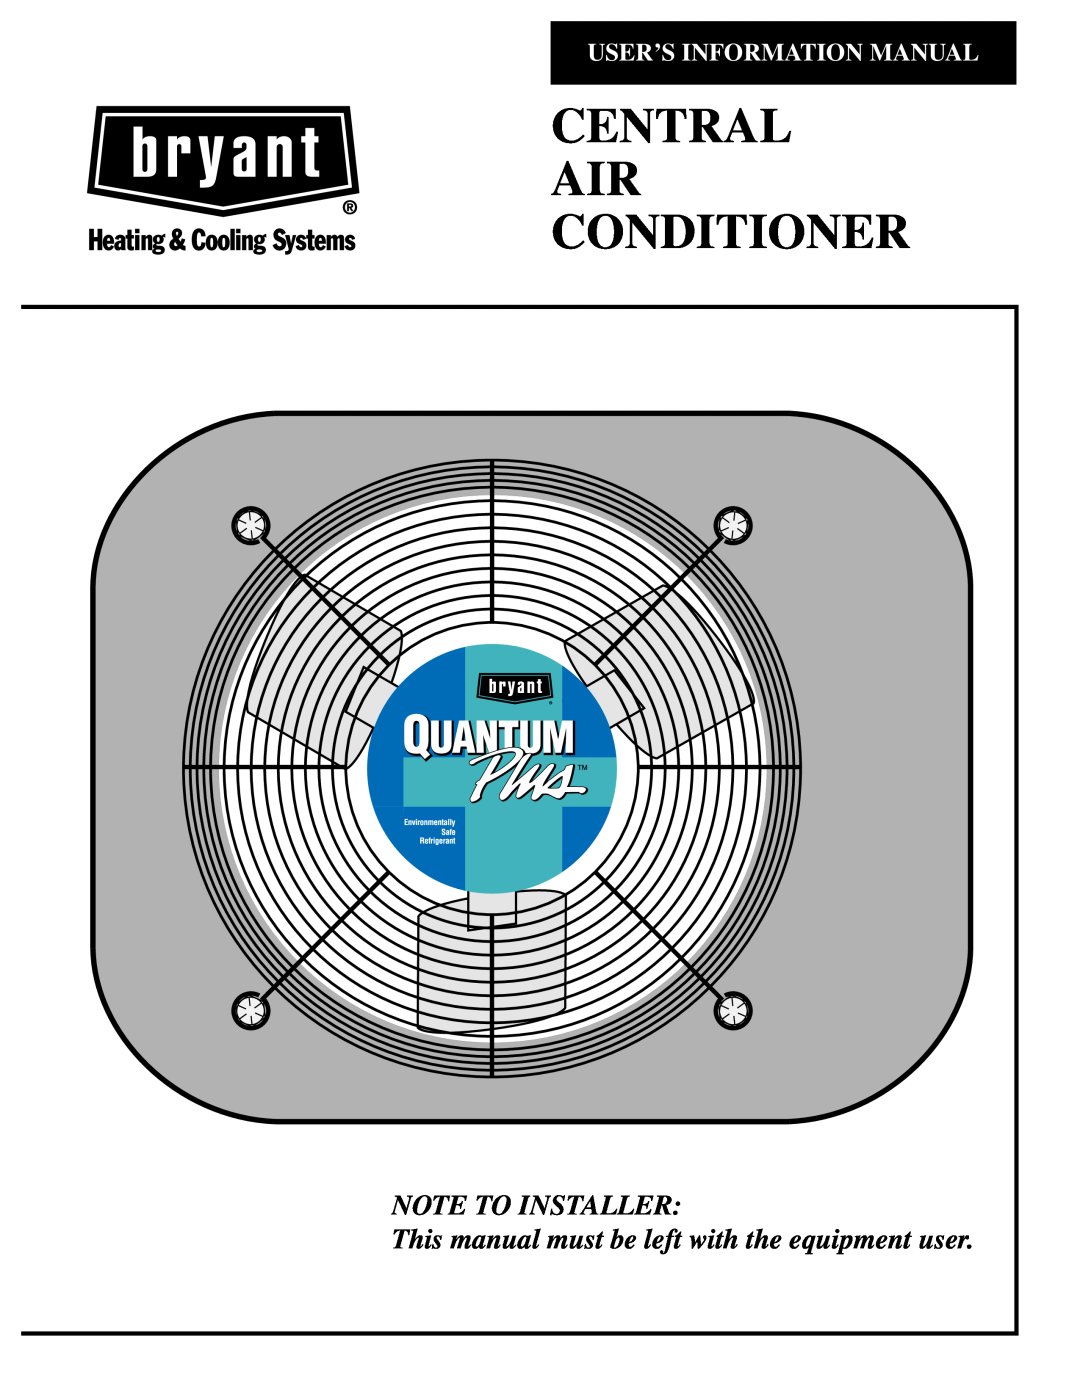 Bryant CENTRAL AIR CONDITIONER manual Central Air Conditioner, Note To Installer, User’S Information Manual 